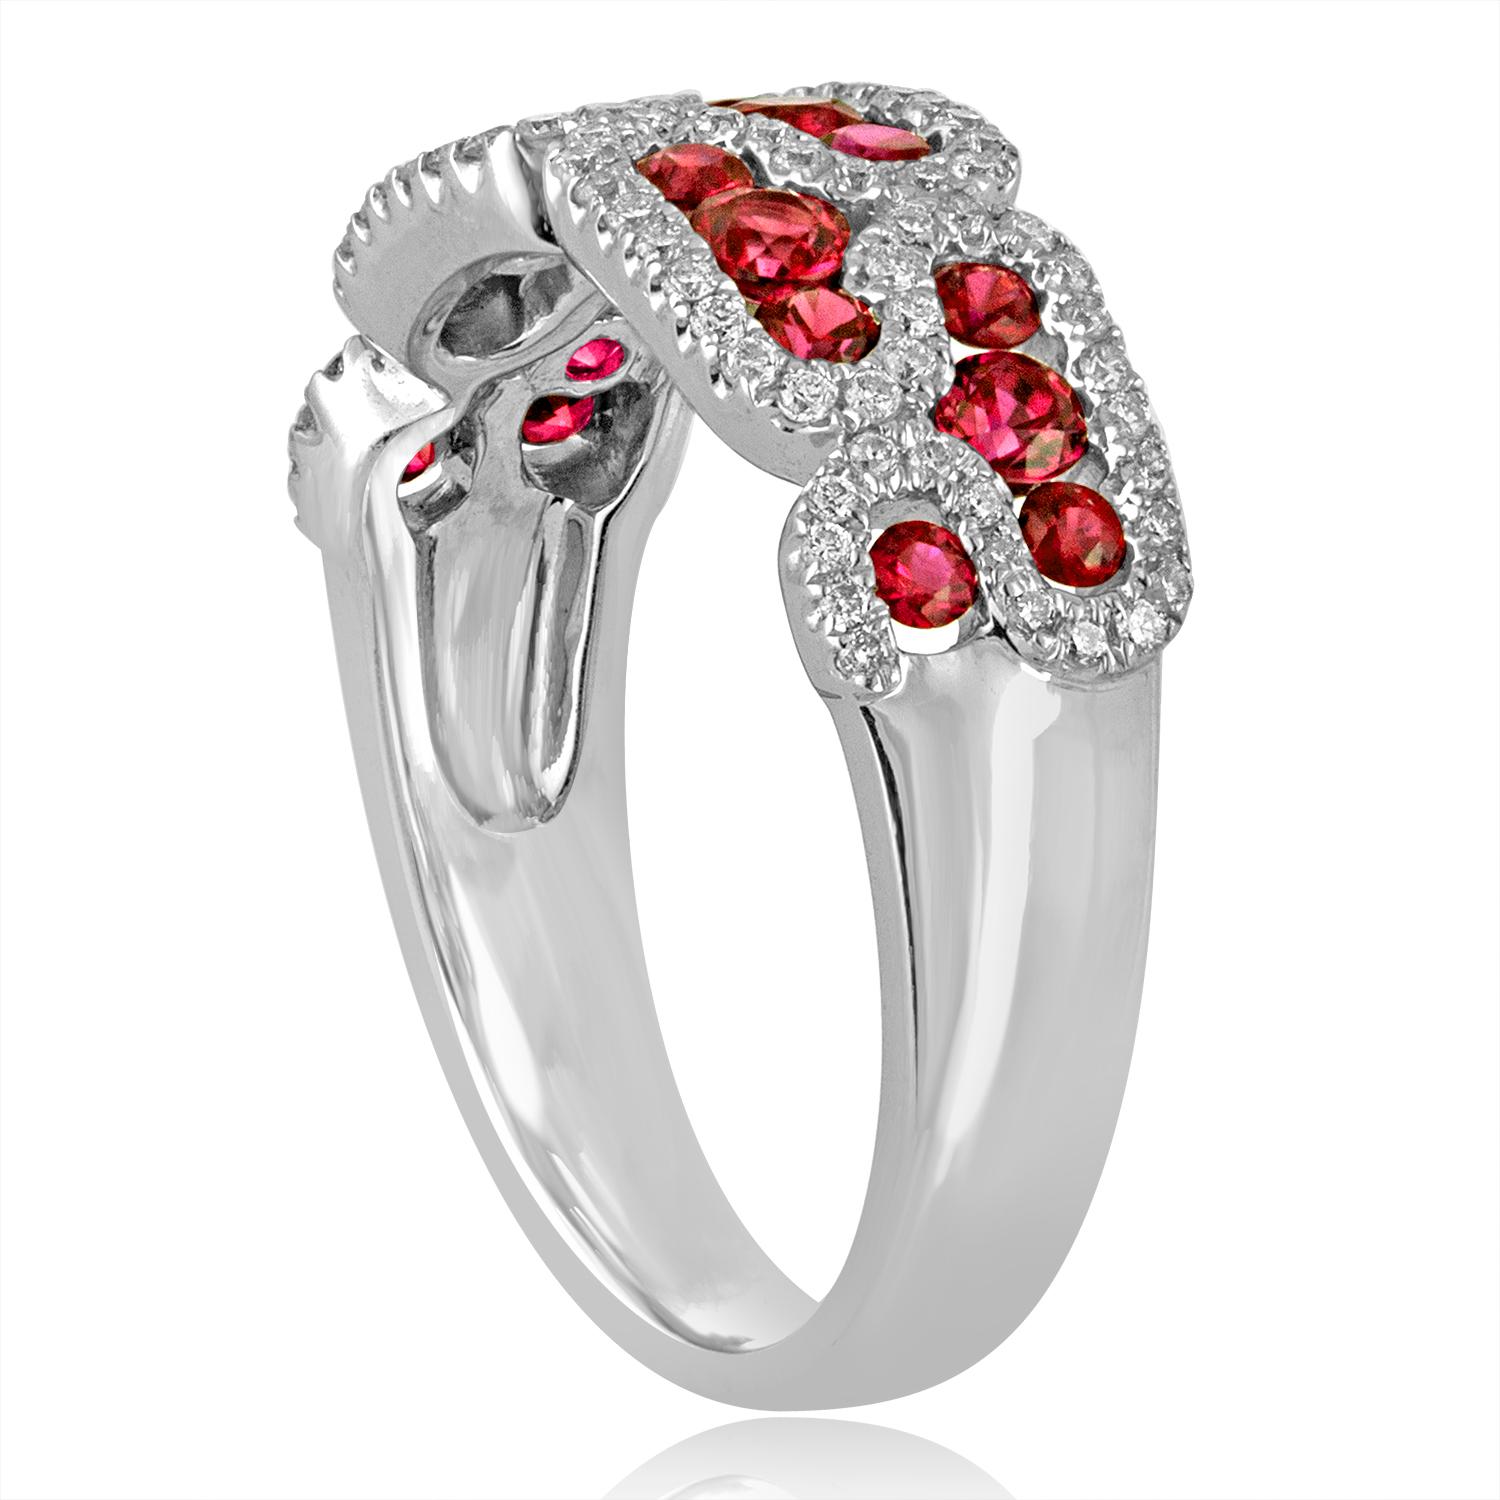 Beautiful Ruby & Diamond Band
The ring is 18K White Gold
There are 0.43 Carats in Diamonds F/G VS/SI
There are 0.85 Carats in Rubies
The band is 0.25